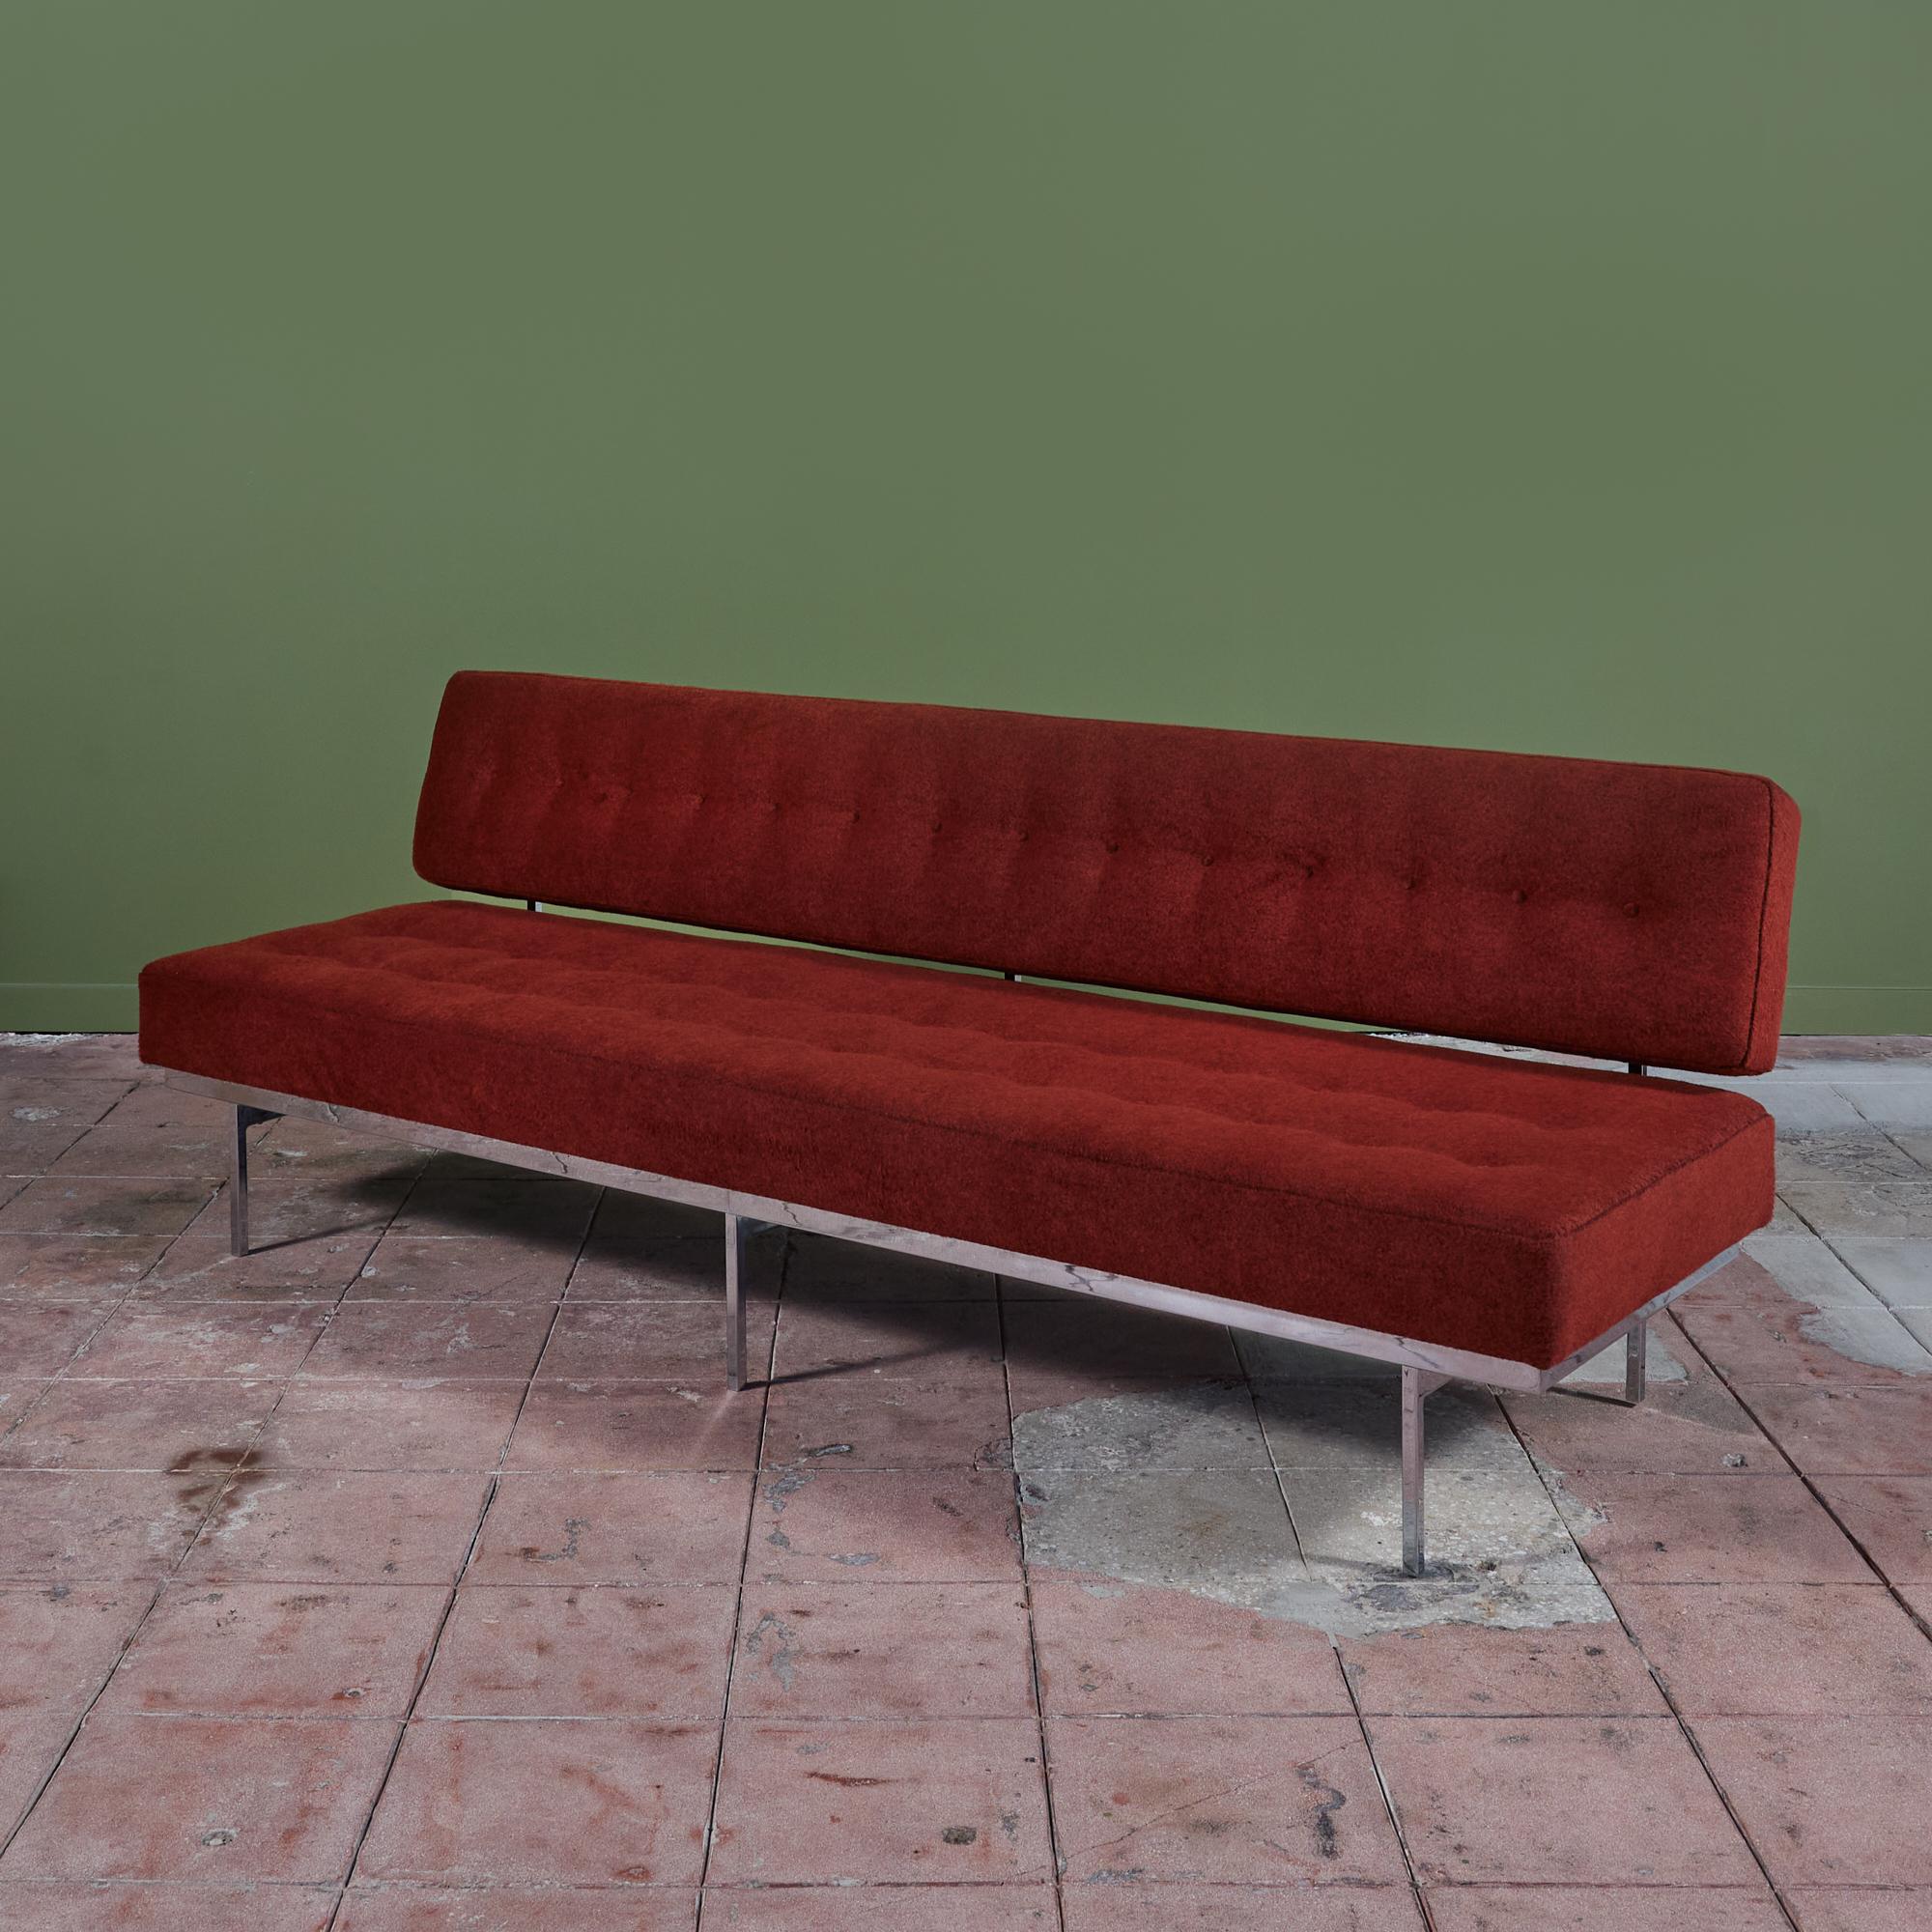 A classic mid-century tufted sofa by Florence Knoll Sofa for Knoll International c.1950s, USA. It can easily be floated in the center of a room as the backing is just as stunning as its front. It's long, horizontal design also appears to float above